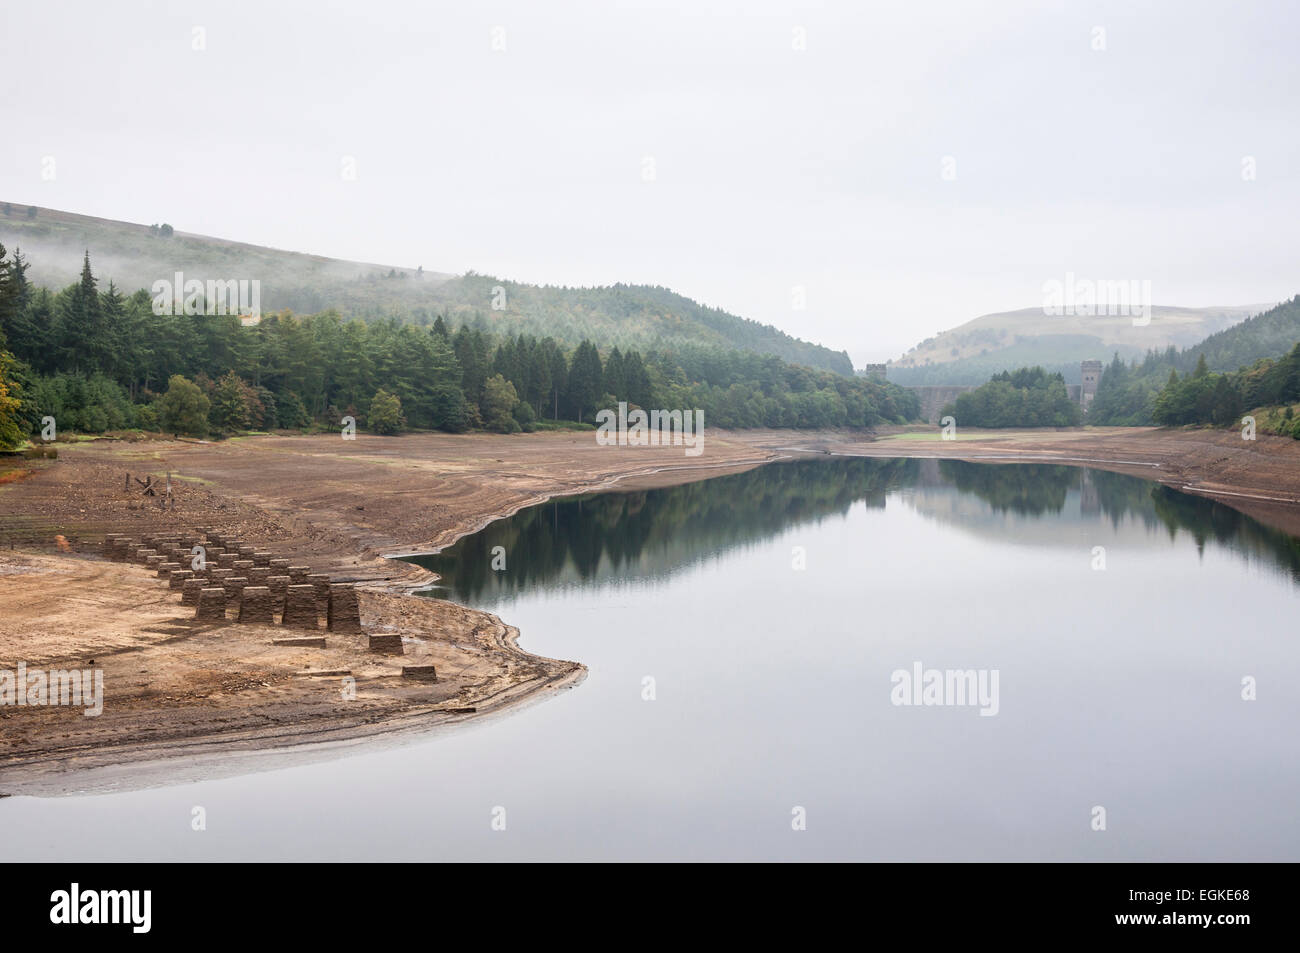 Looking across Derwent reservoir to Howden Dam with low water levels revealing the structure of an old railway. Stock Photo